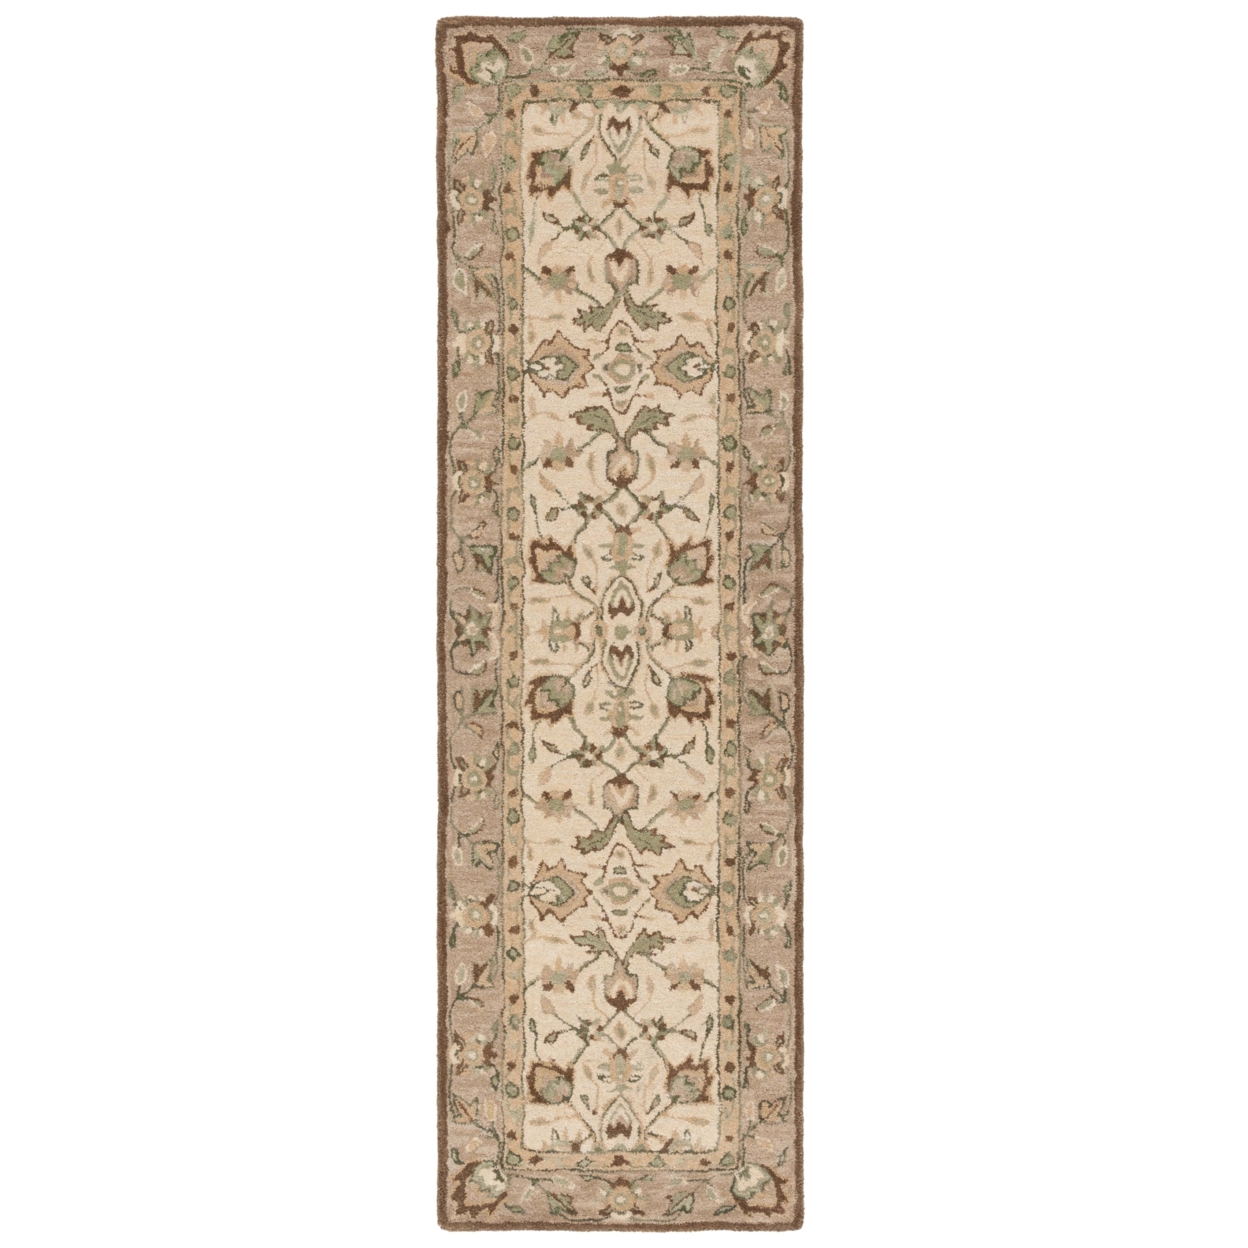 Safavieh AT65B Antiquity Ivory / Beige - Grey / Pink, 9' X 12' Rectangle